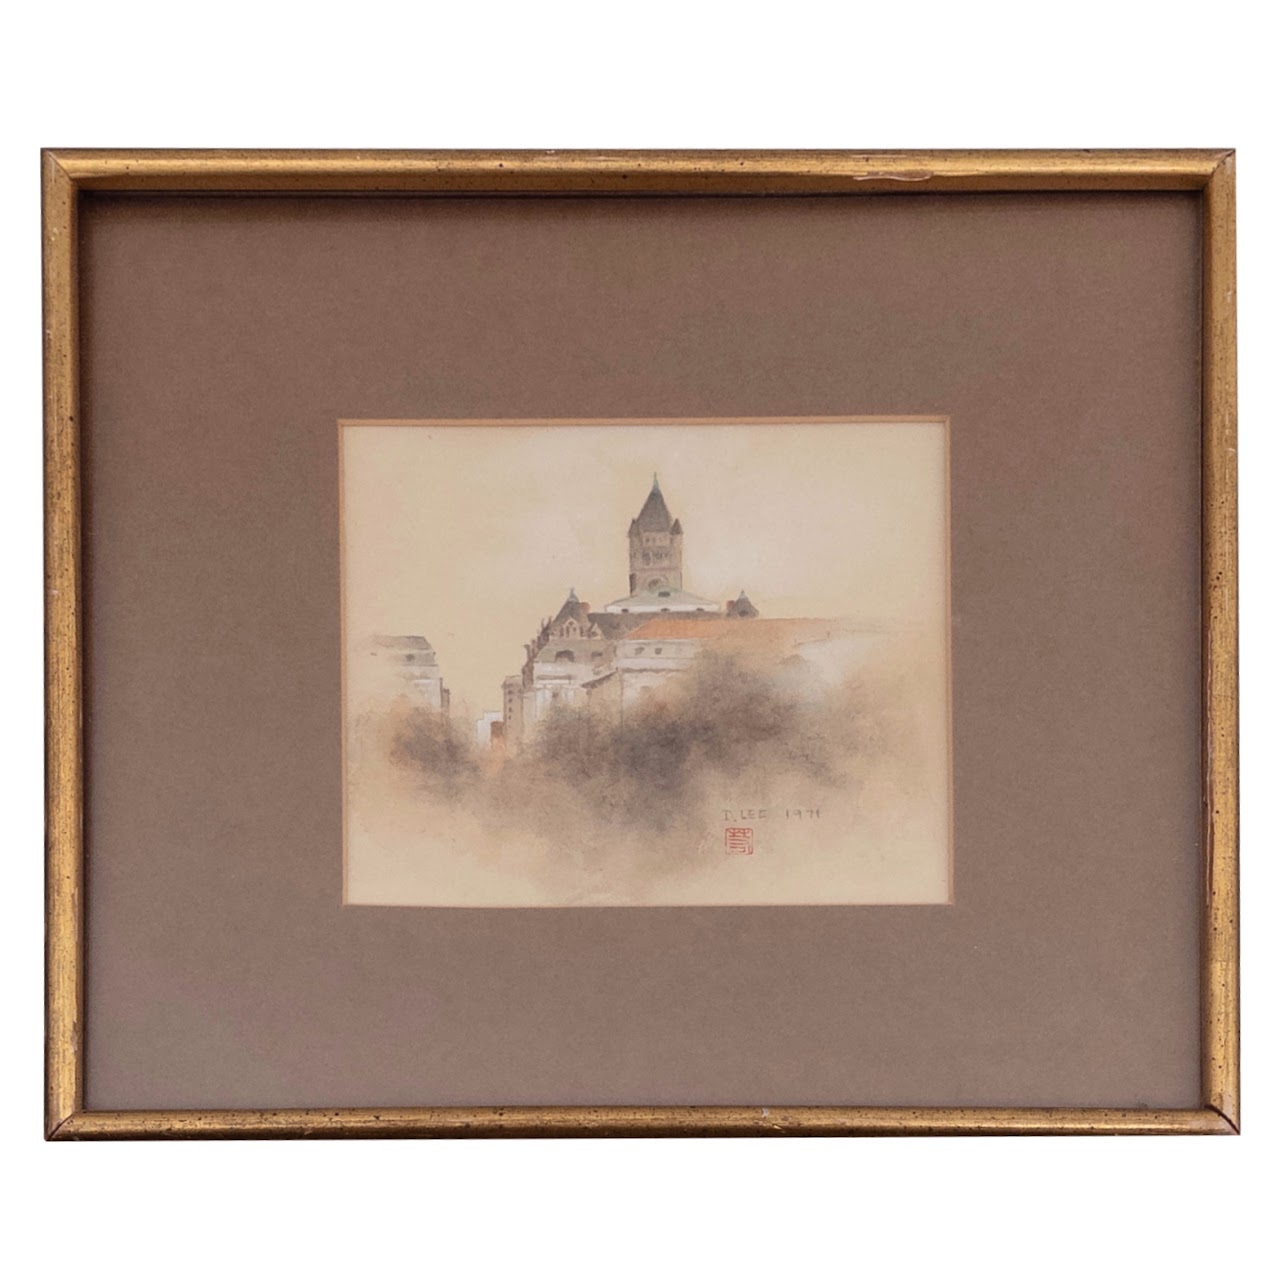 David Lee Signed Cityscape Painting